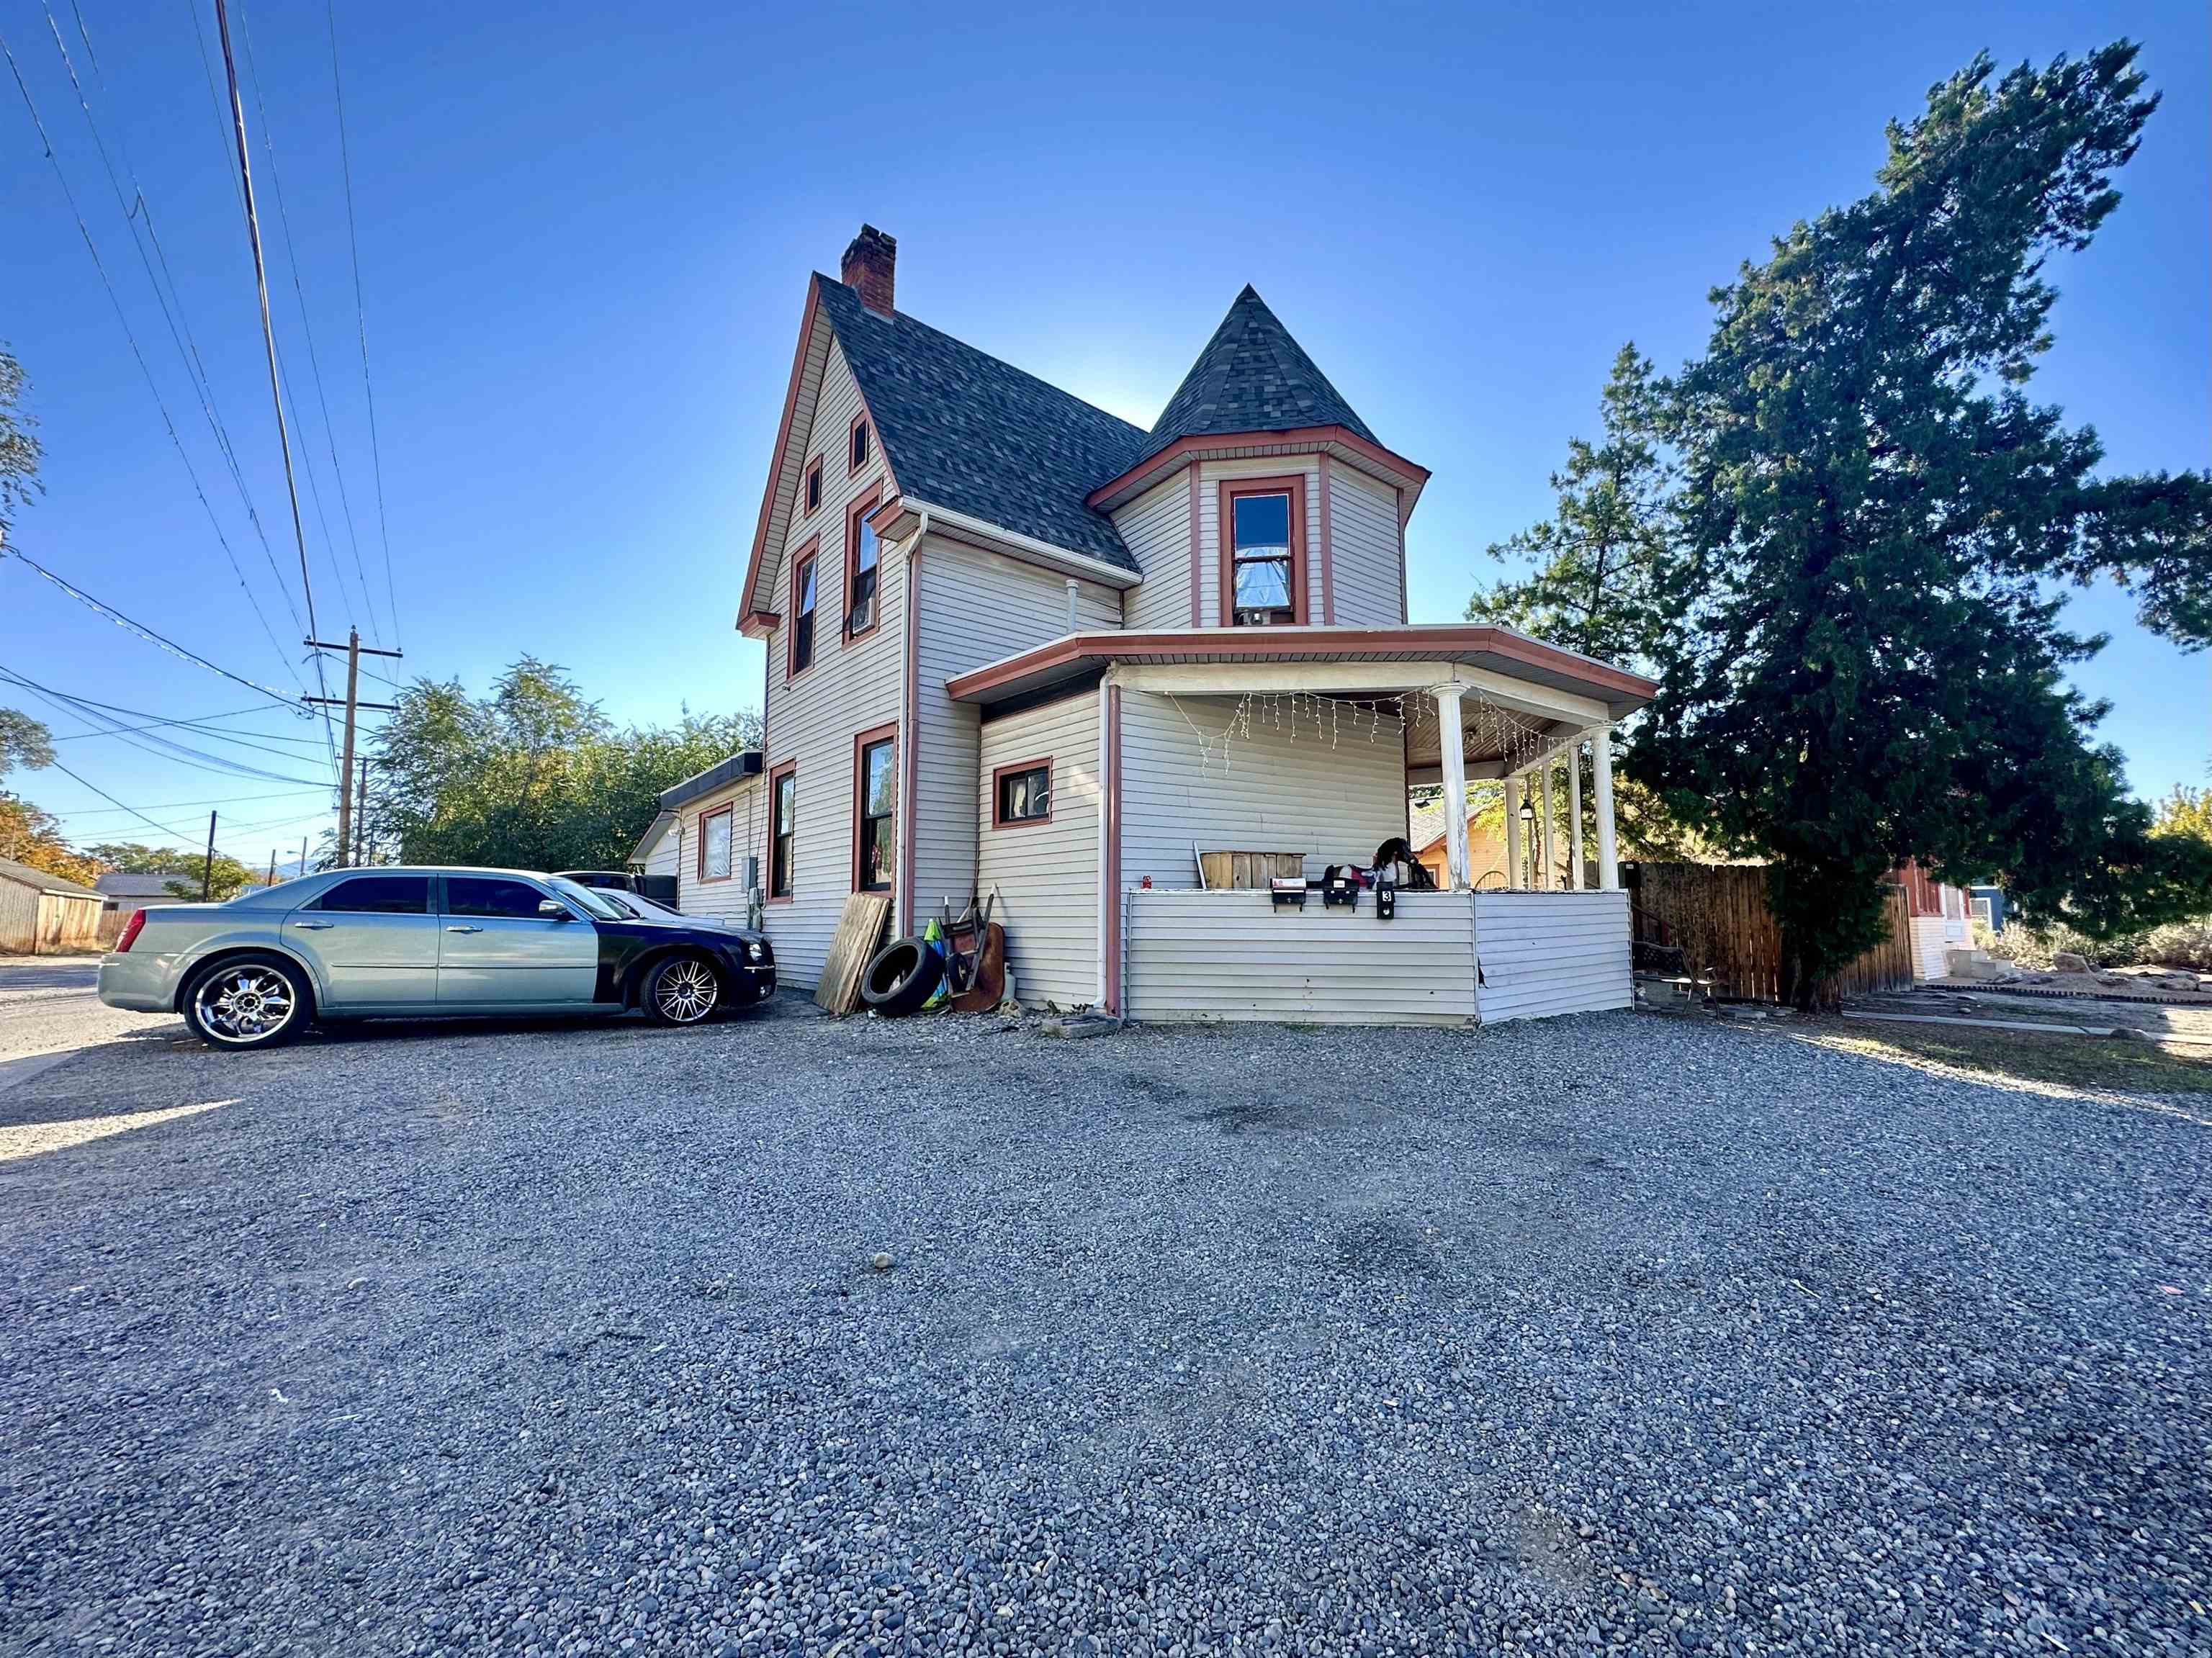 Good 3 bed, 2 story Victorian home with detached triplex in back yard in good condition. Live in the main home and rent out the tri-plex units.  Main home has new roof , heating and some updated plumbing and electric. Lots of potential. Triplex built in 1981.